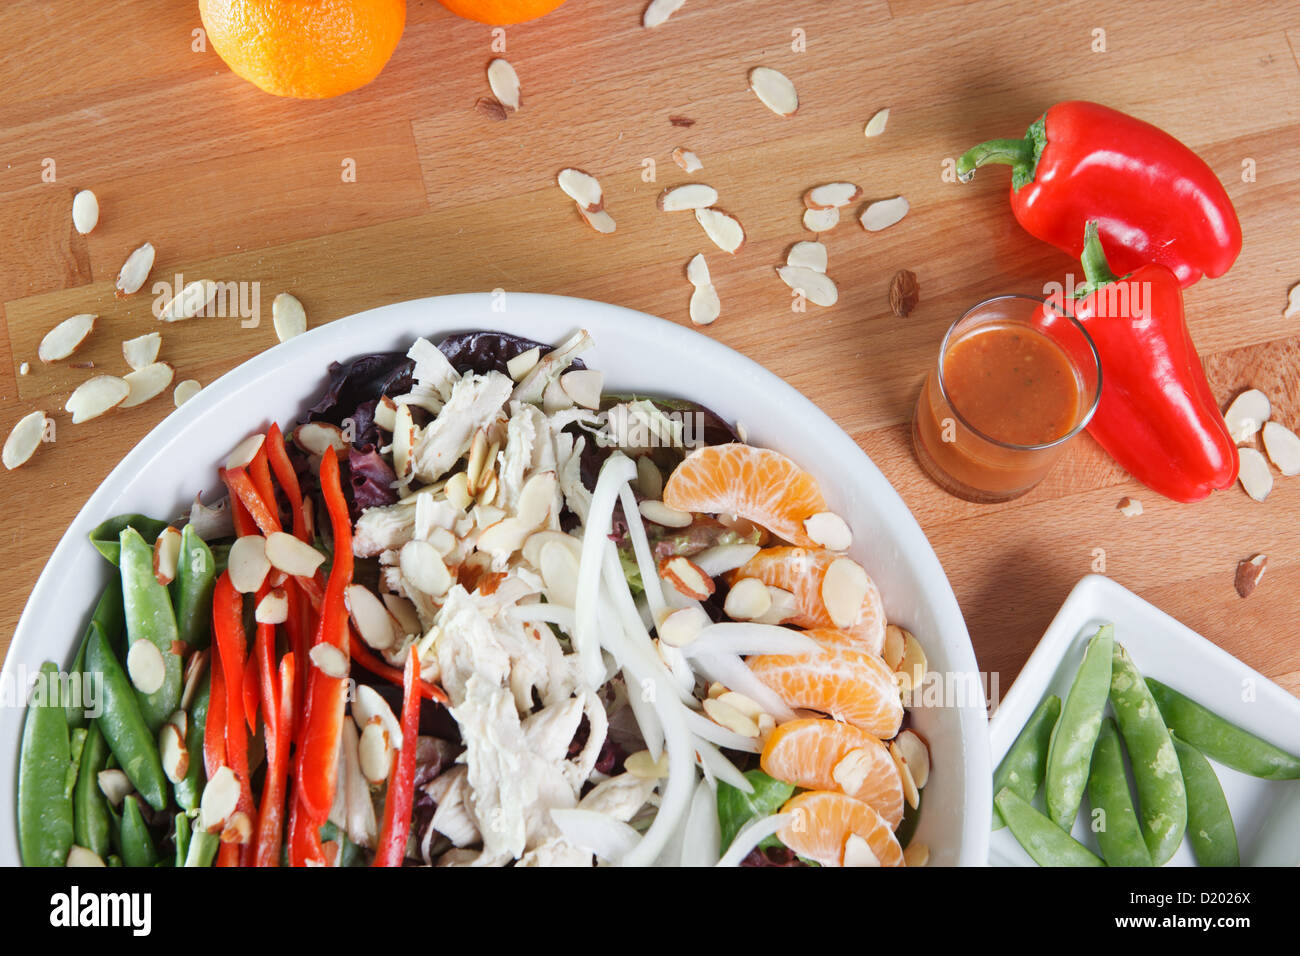 Entree sized Asian salad with chicken, bell peppers, tangerines, almonds, and much  more Stock Photo